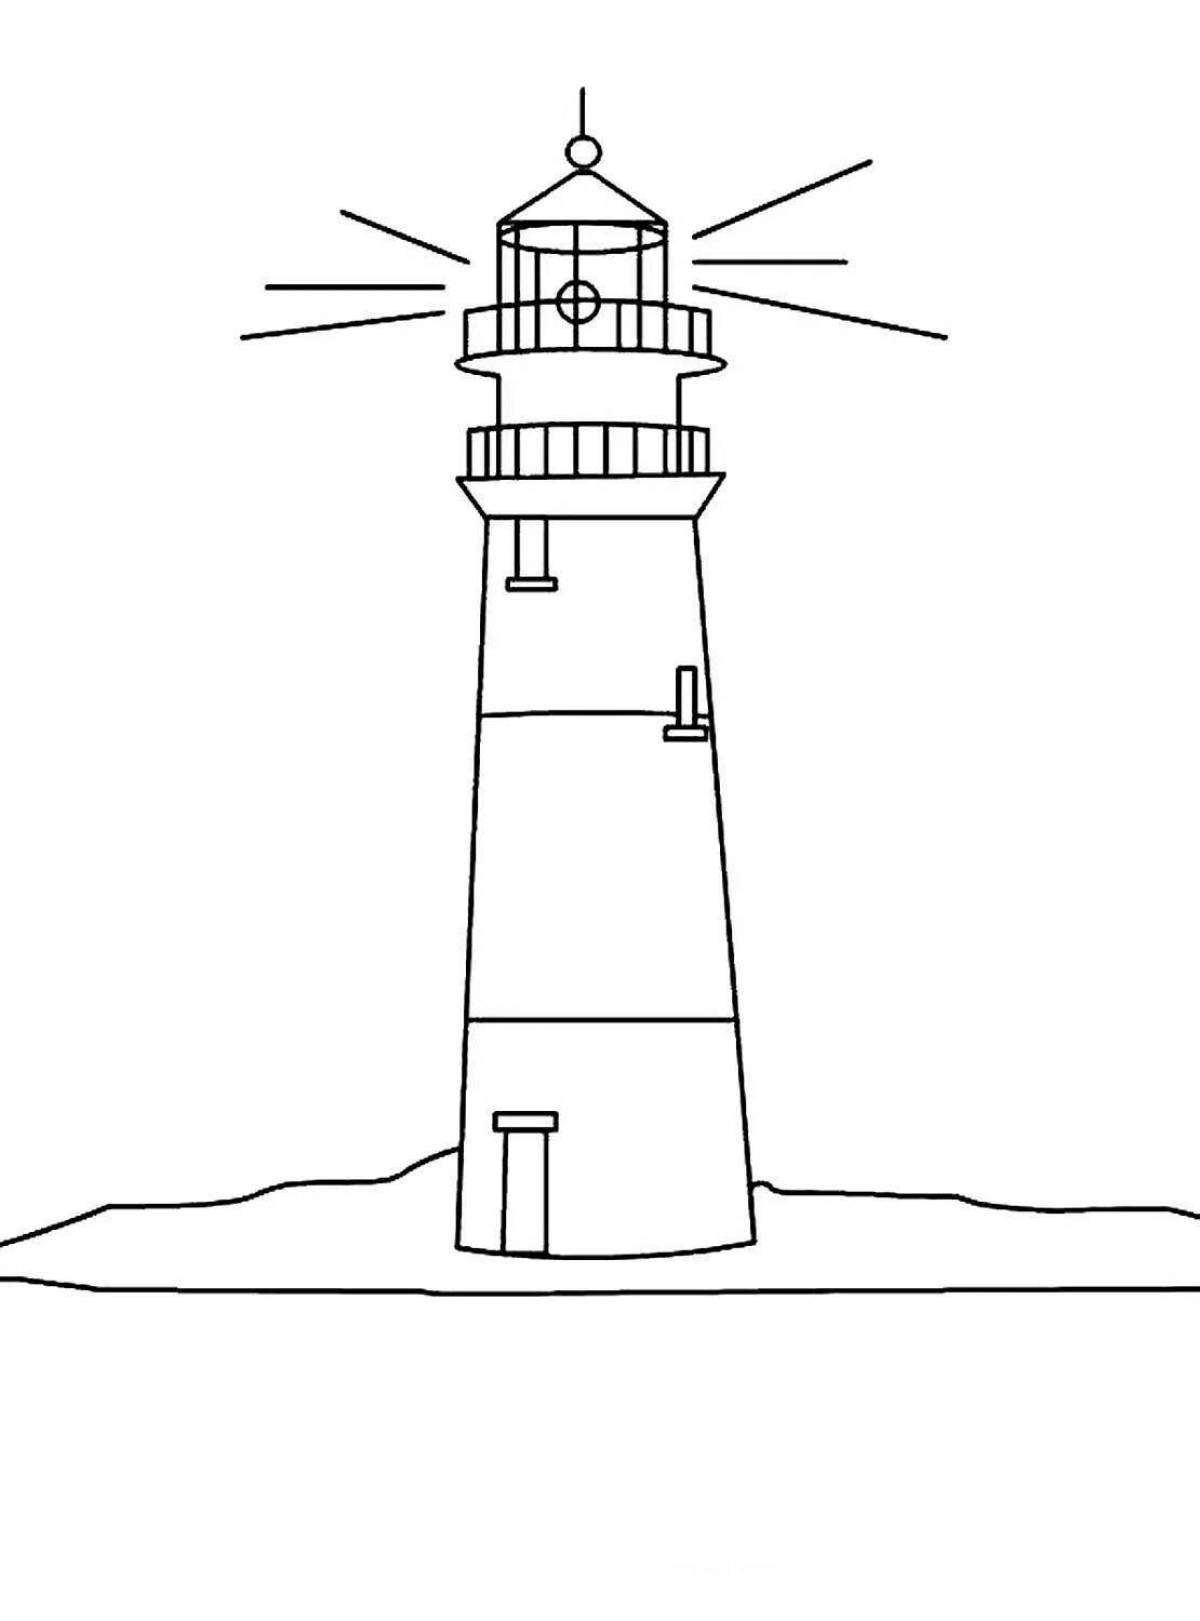 Joyful electric towers coloring pages for kids